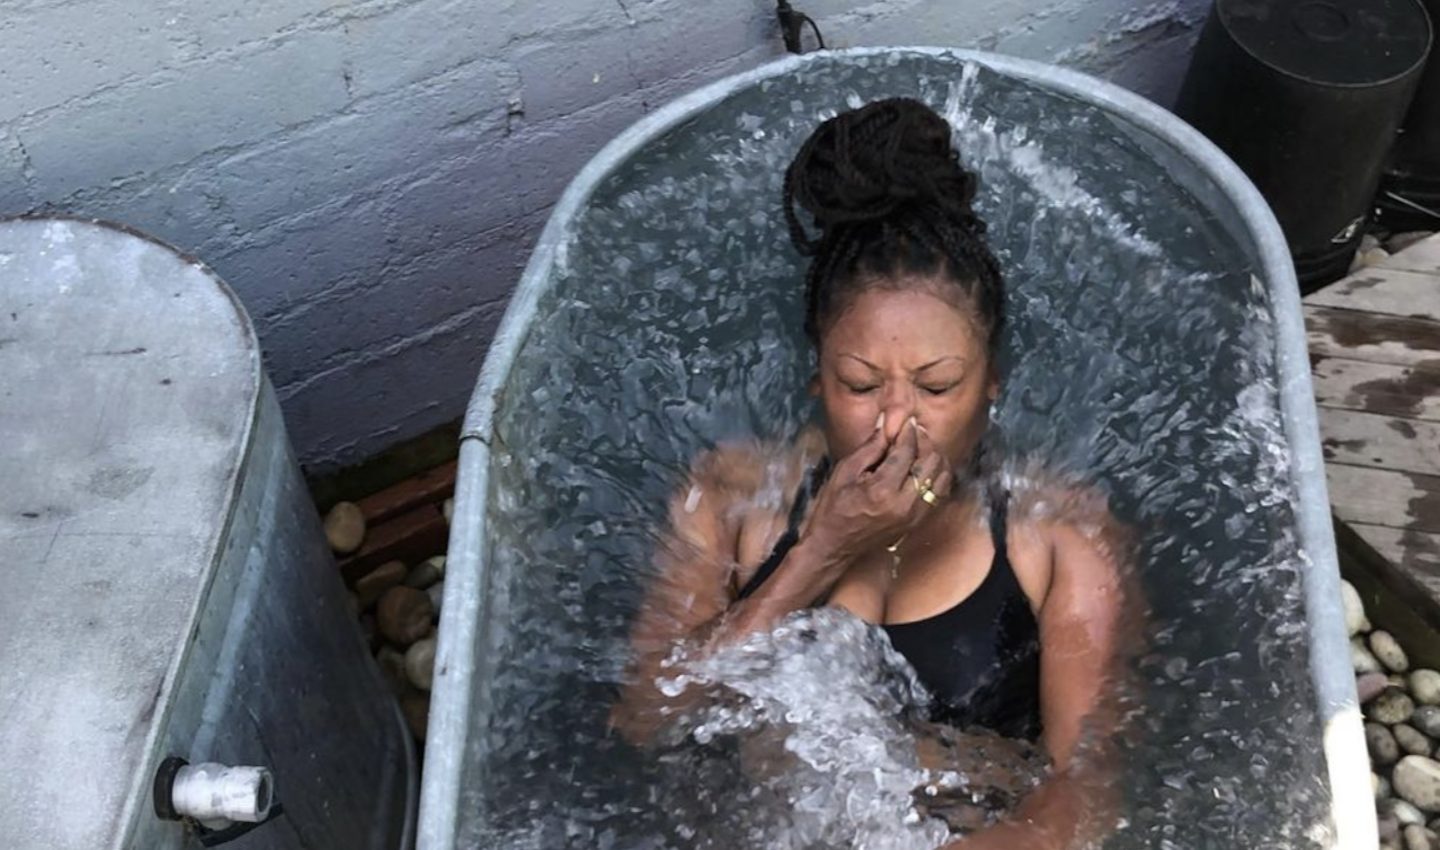 Potential Cold-Water Therapy and Ice Bath Benefits